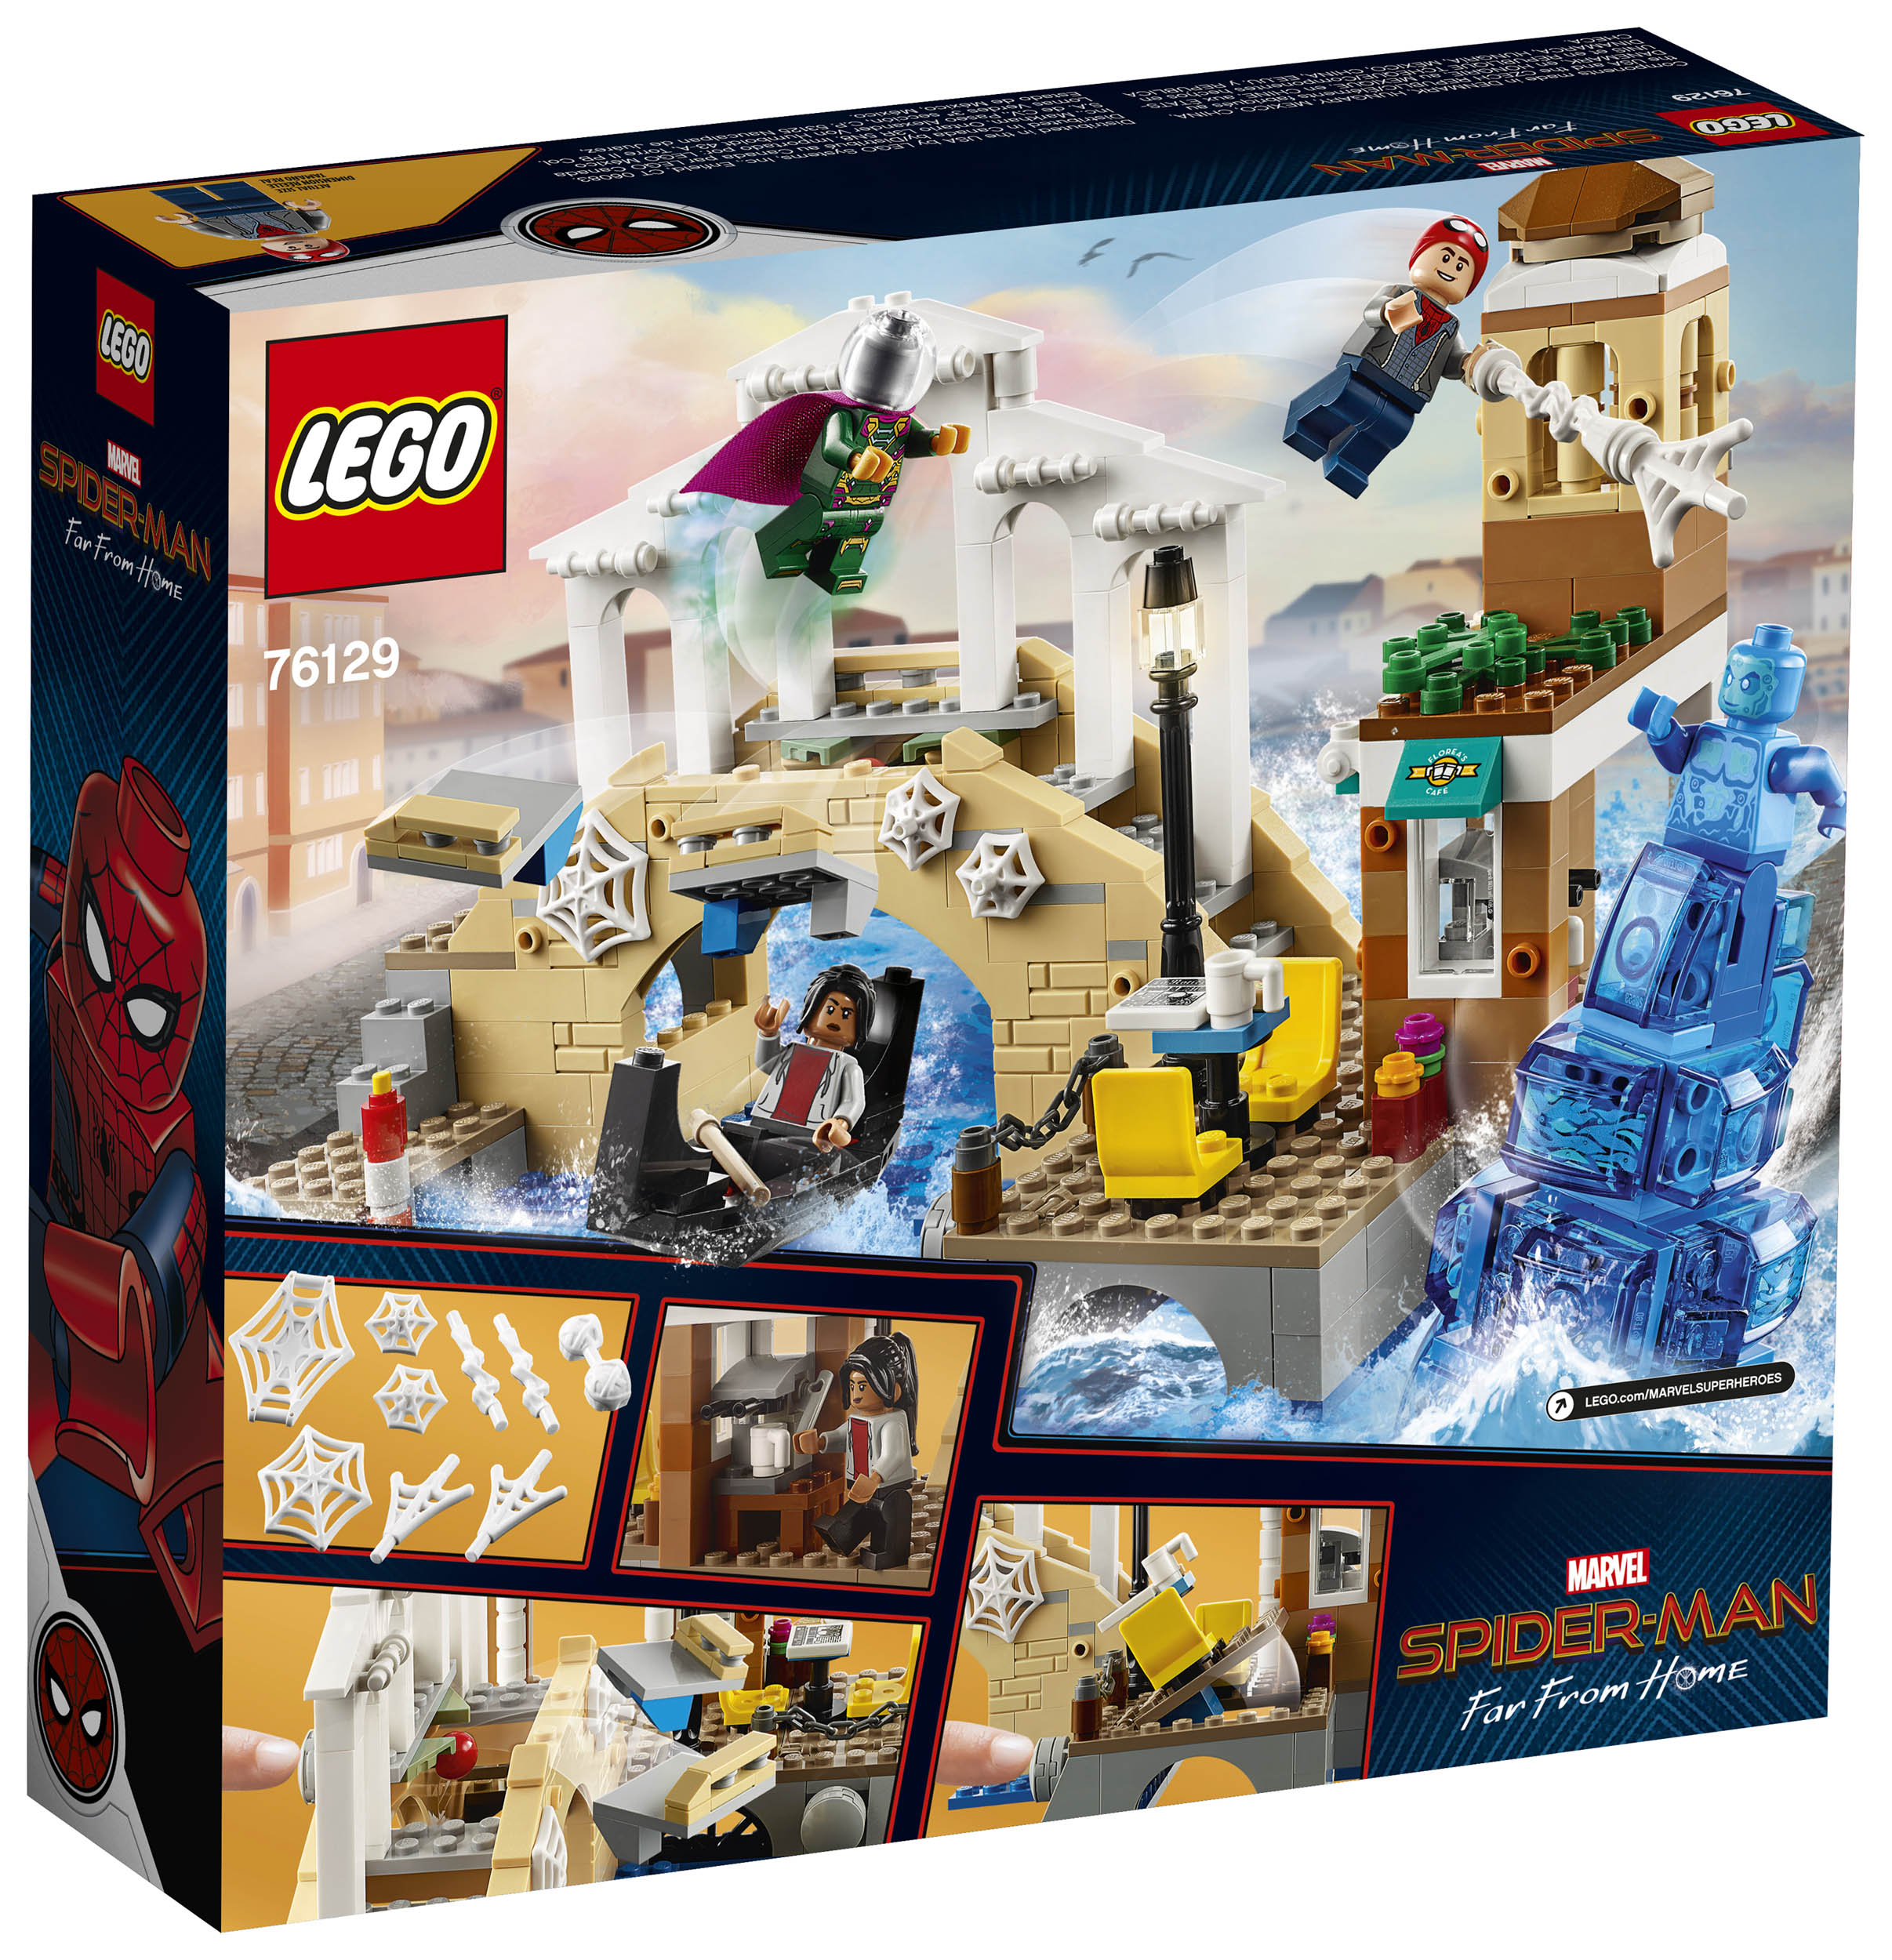 LEGO Spider-Man Far From Home Sets Up for Order! - Marvel Toy News